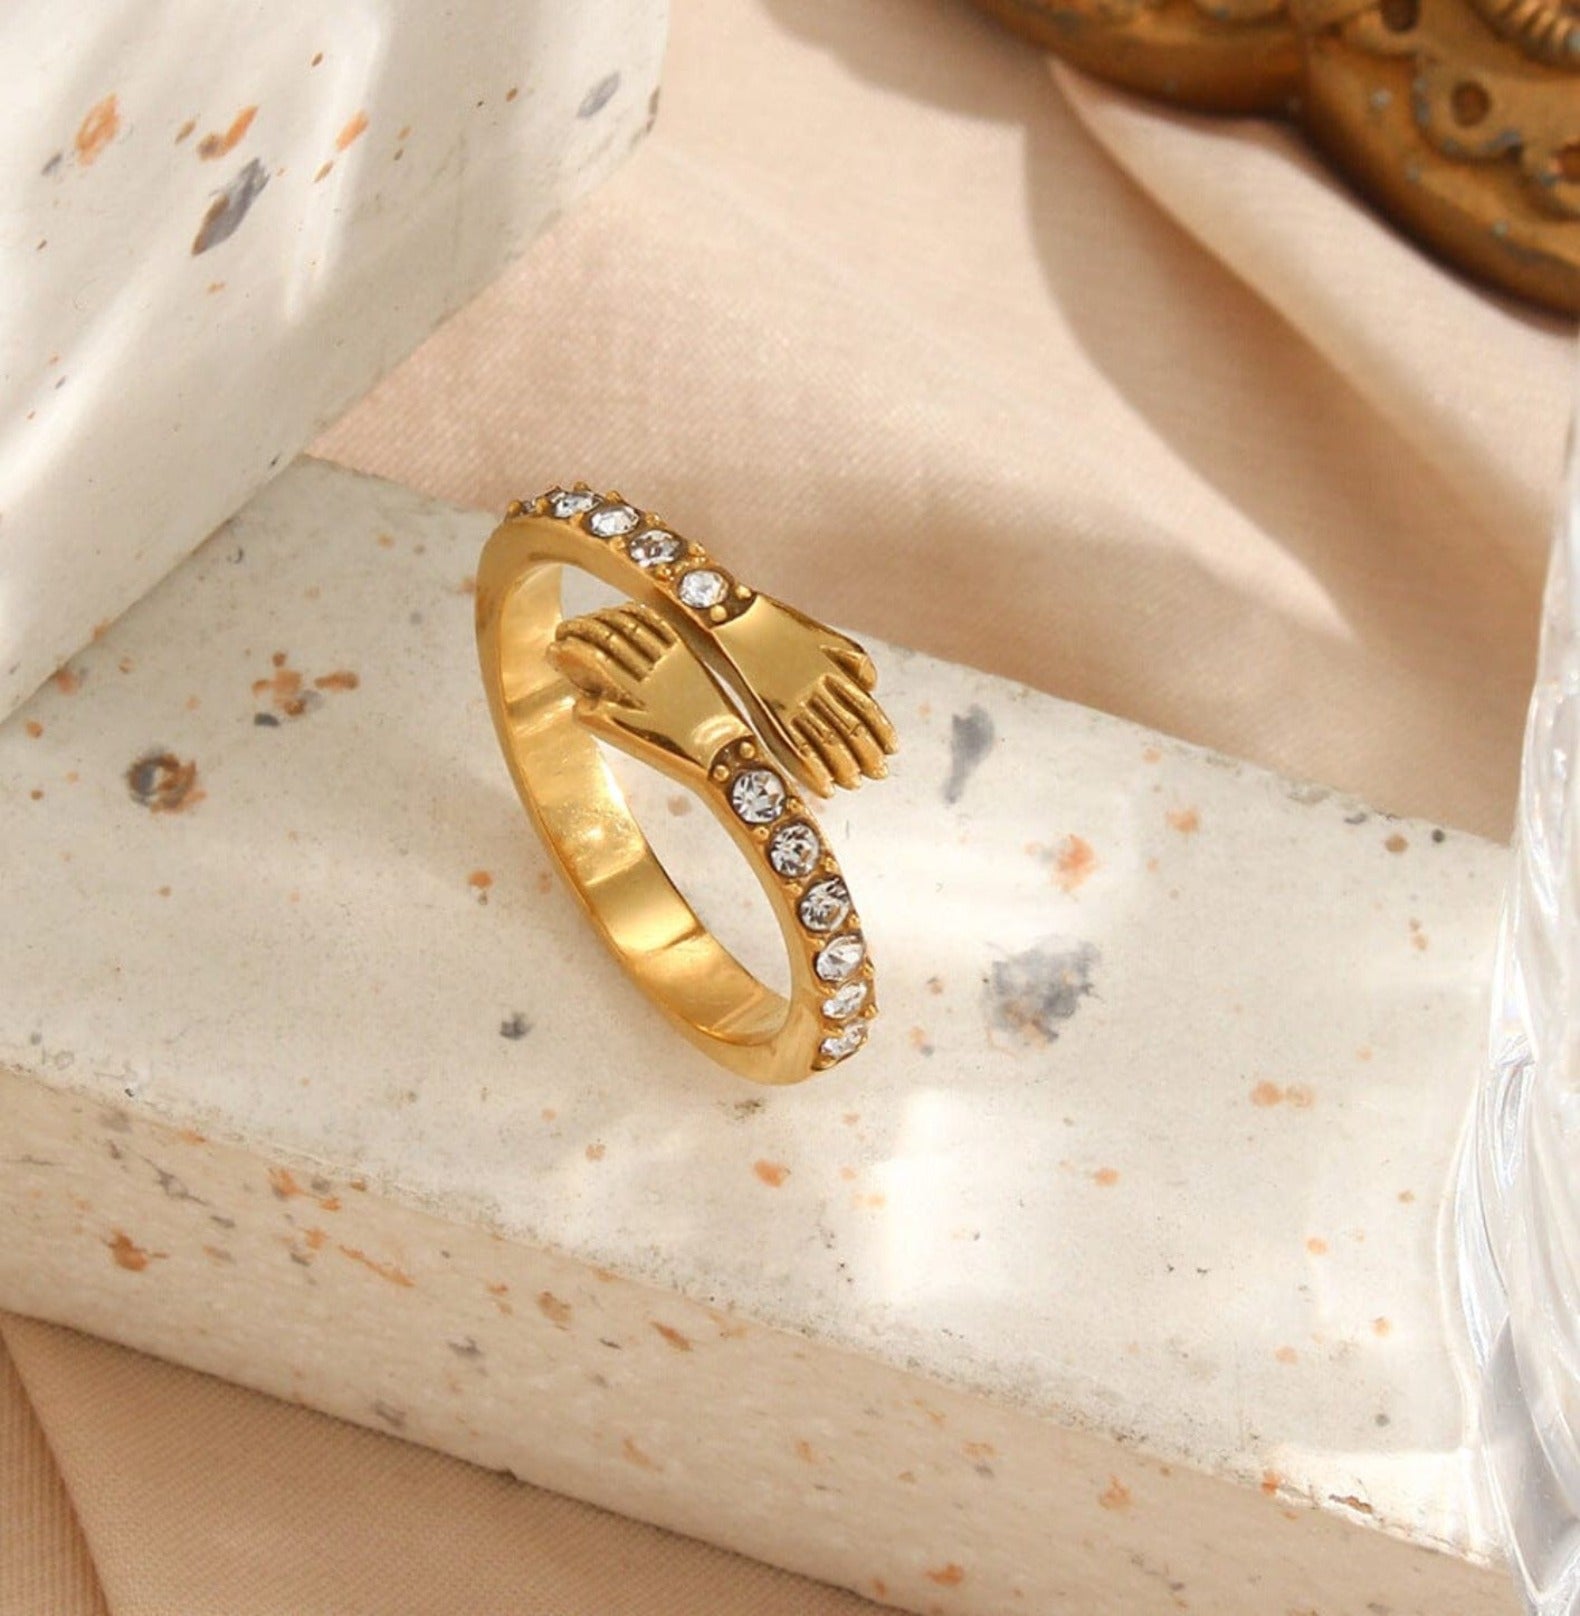 Stainless Steel Hands Hugging Zircon Adjustable Ring ring Yubama Jewelry Online Store - The Elegant Designs of Gold and Silver ! 